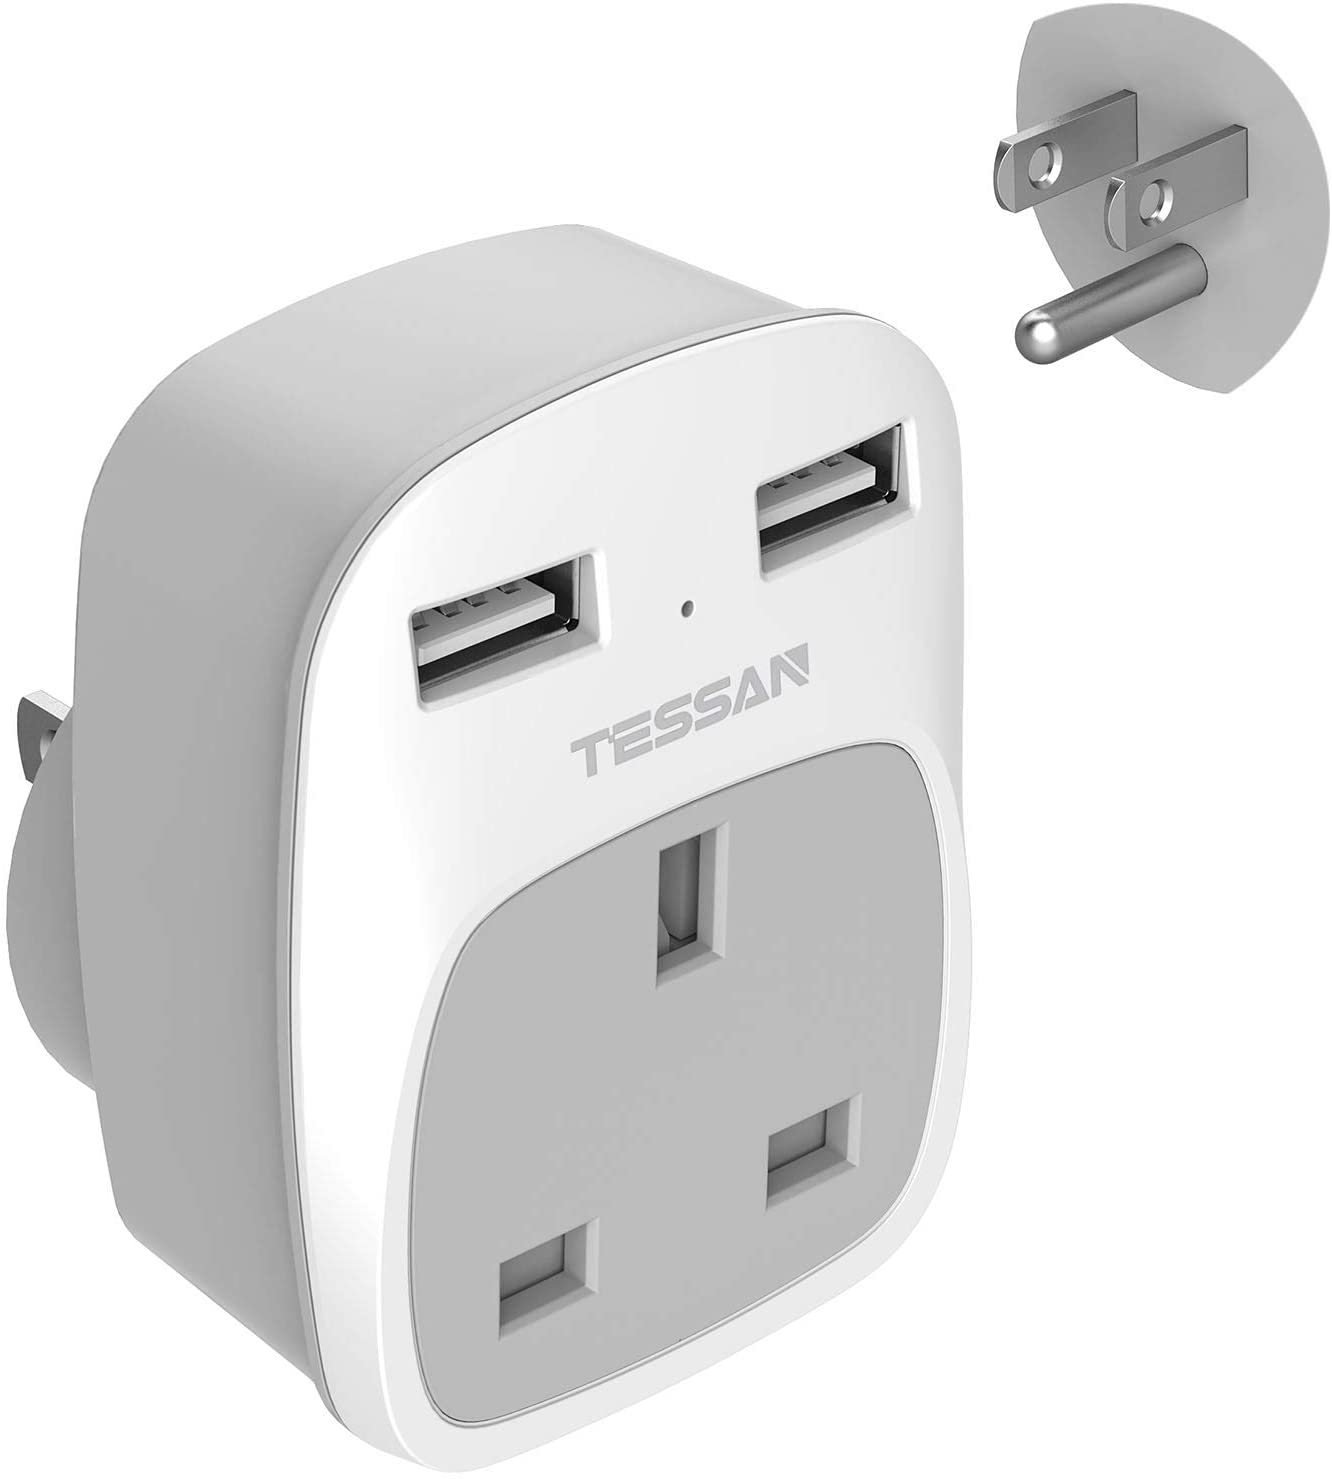 travel adapter needed for thailand